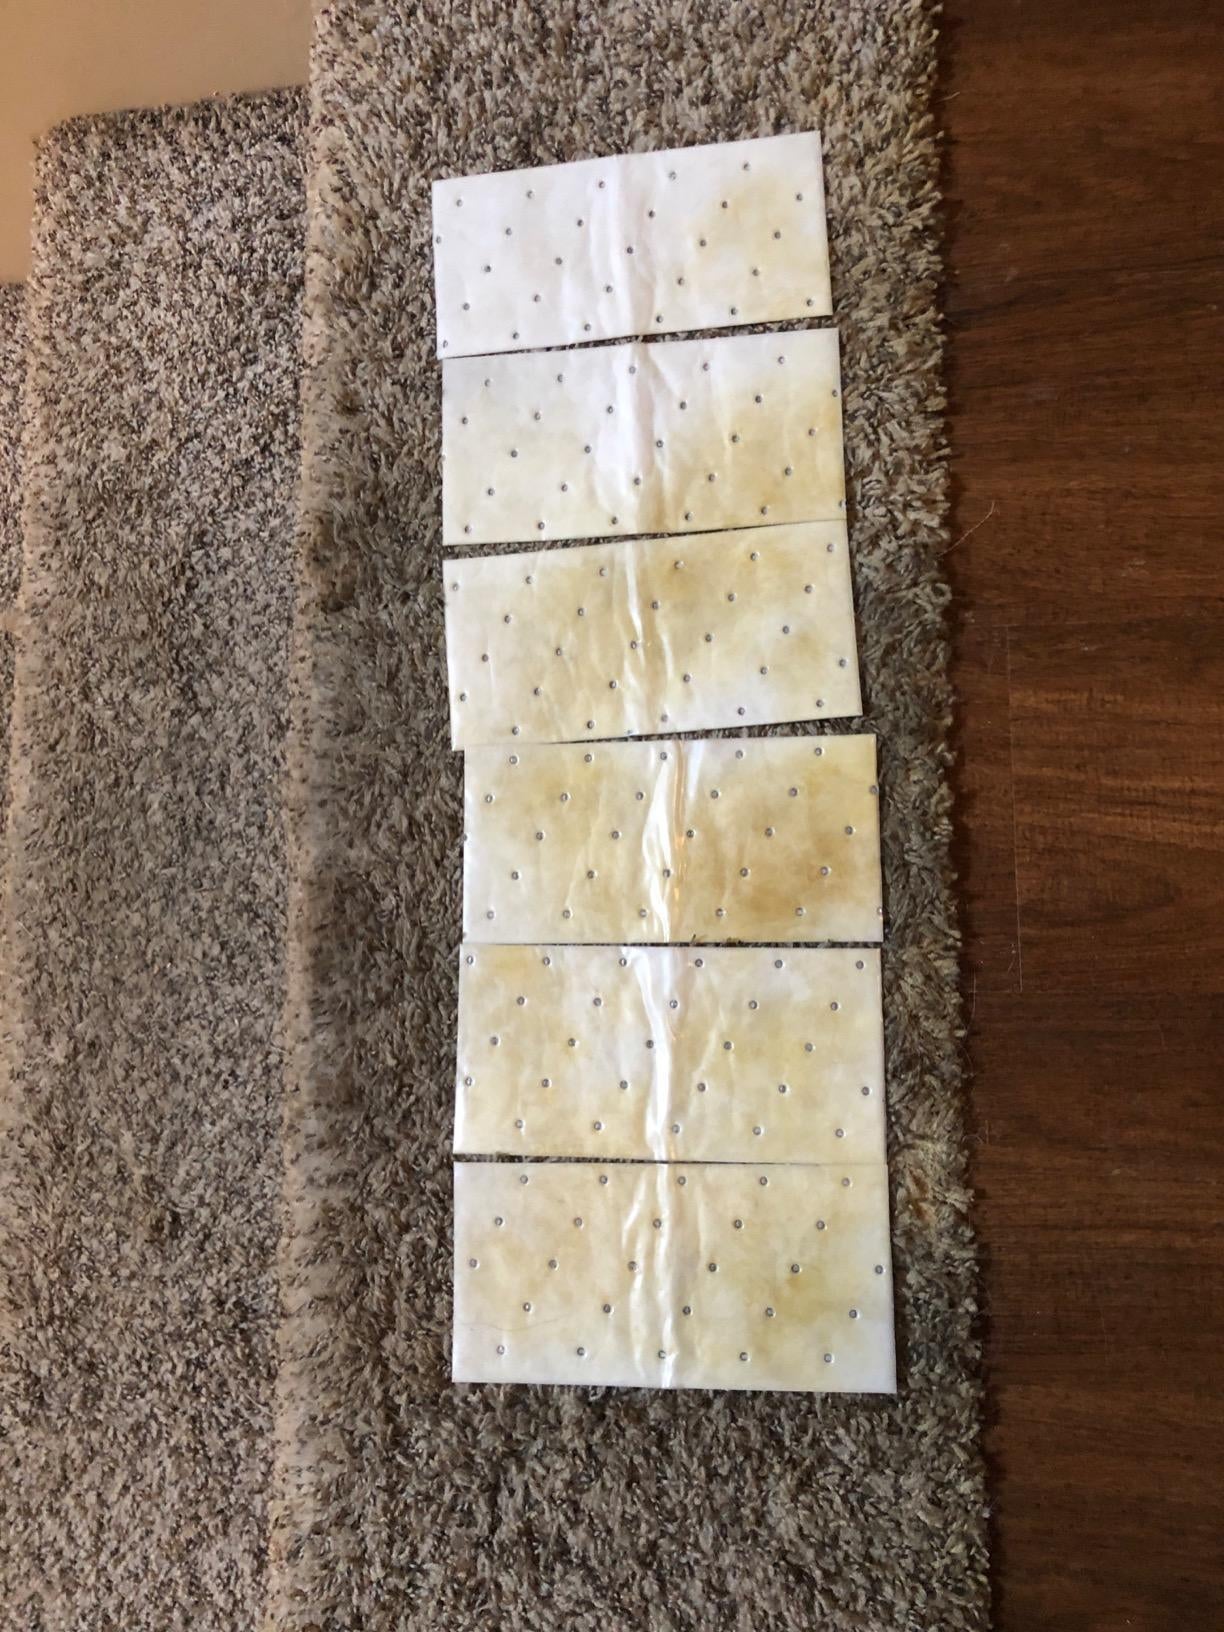 the pads soaking up urine stains left on gray carpet 